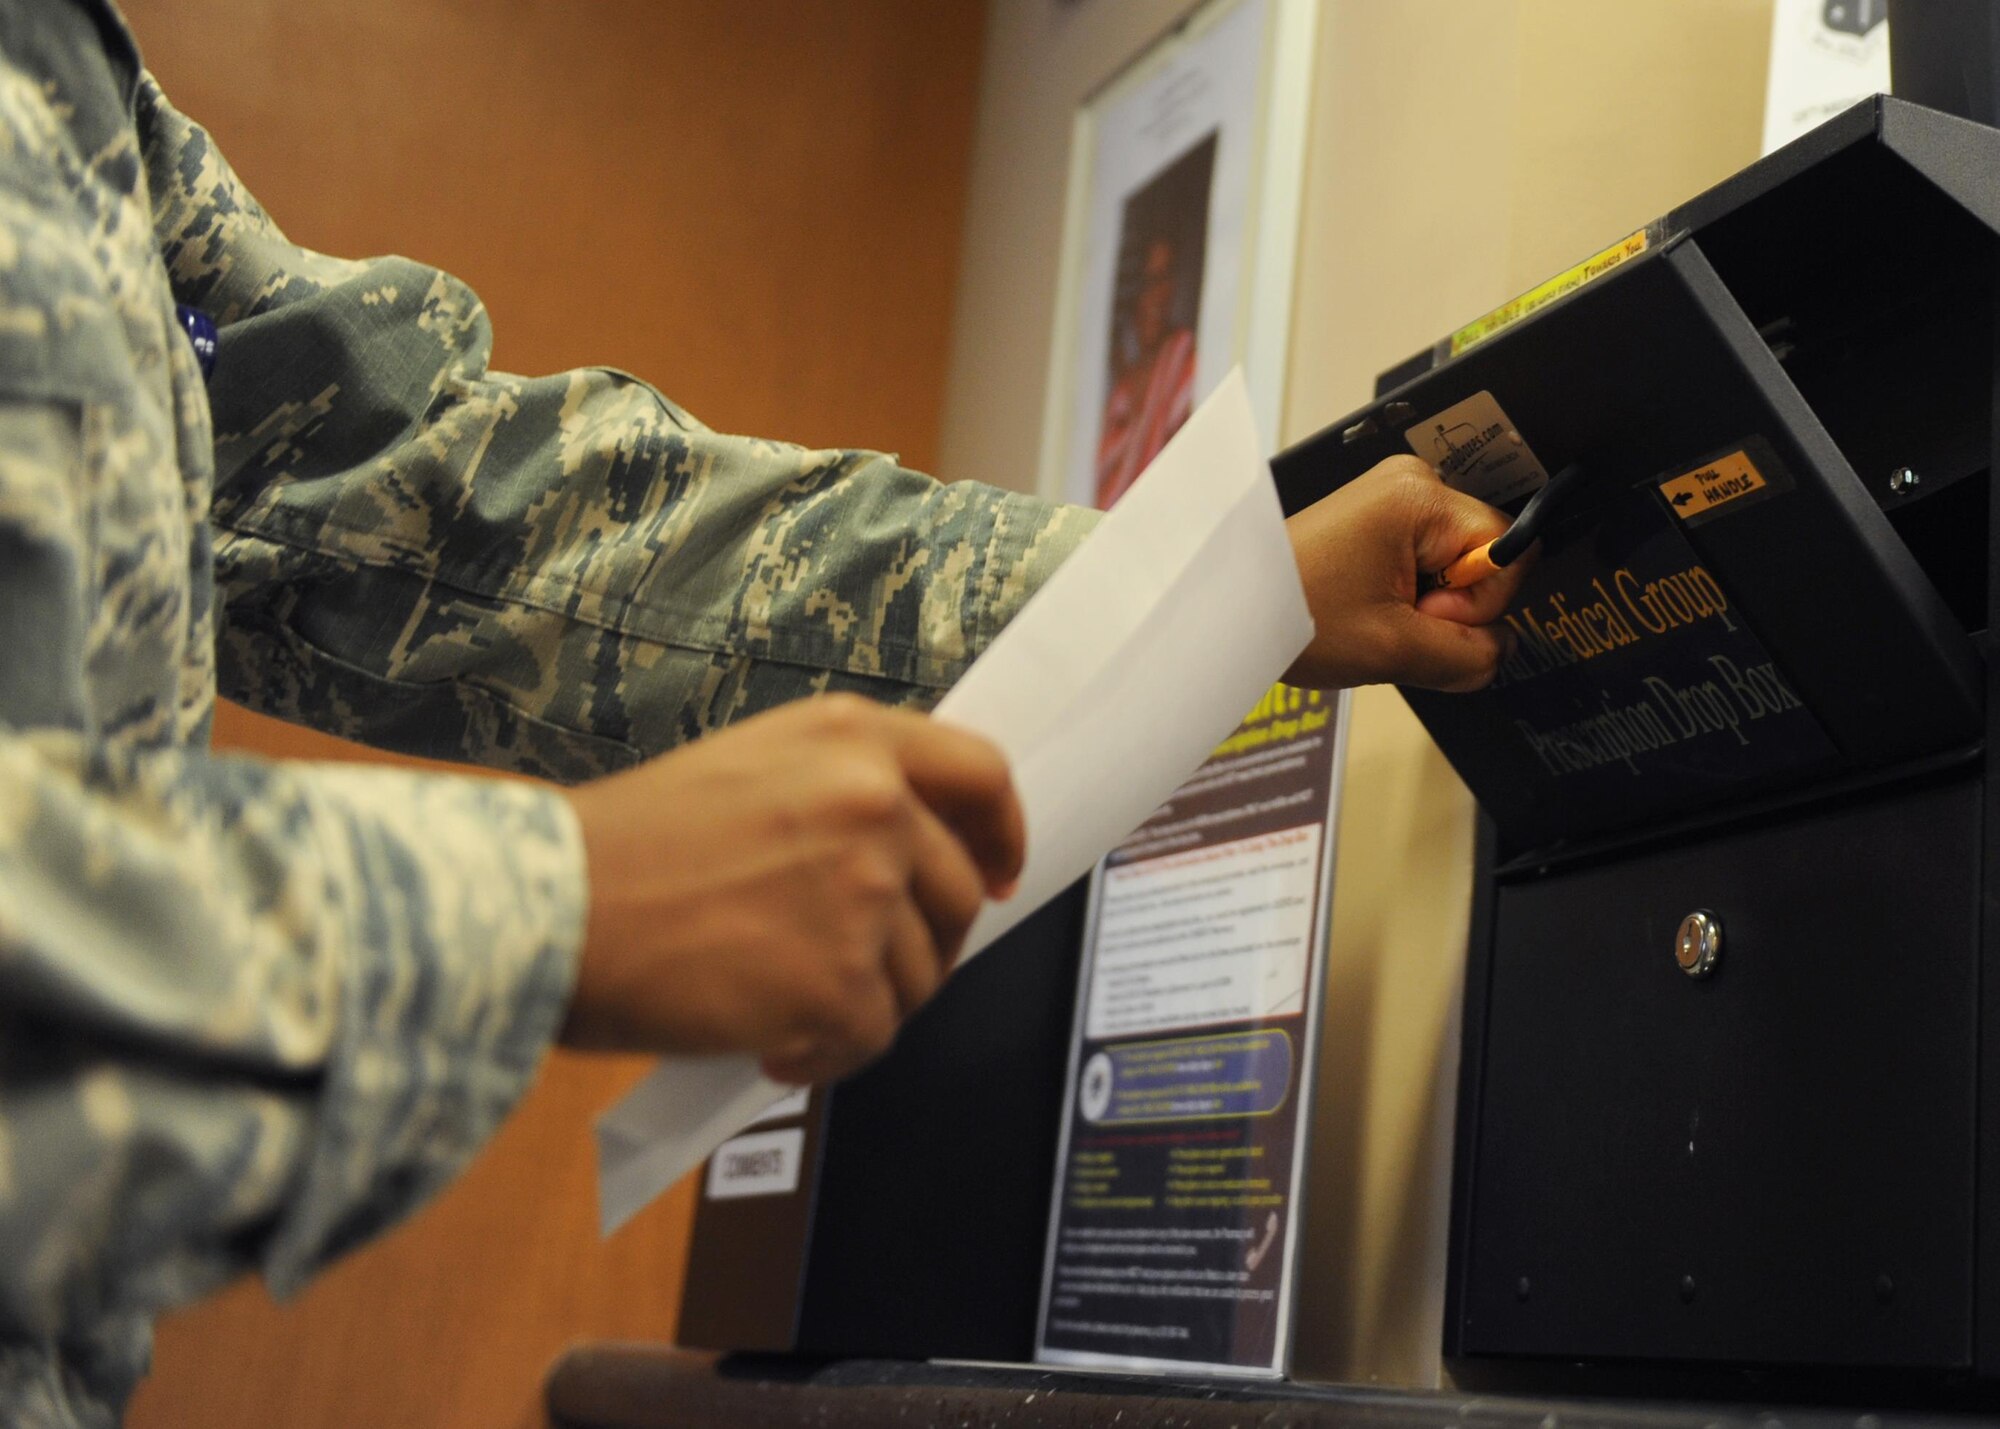 A service member uses the prescription drop box Jan. 12, 2017, at the 19th Medical Group pharmacy on Little Rock Air Force Base, Ark. The drop box is available 7:30 a.m. to 4:30 p.m. Monday through Friday in the pharmacy lobby. (U.S. Air Force photo by Airman 1st Class Grace Nichols)